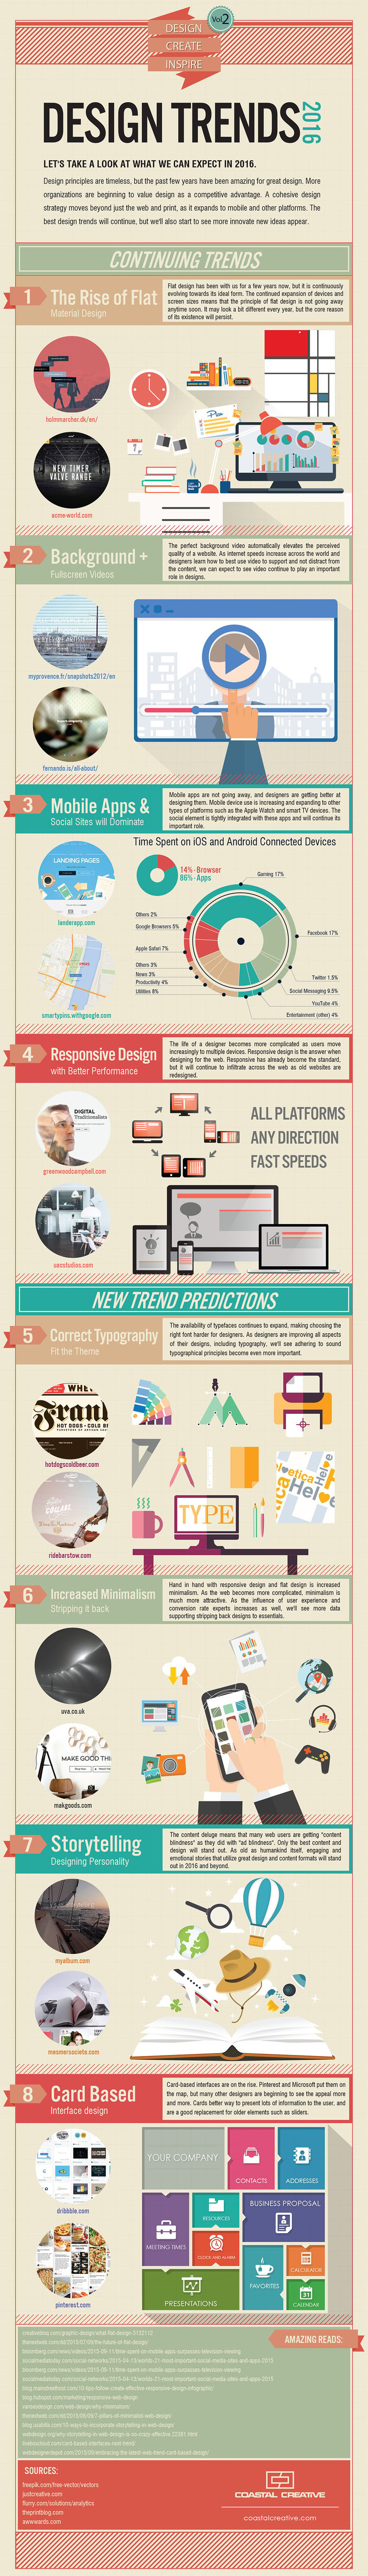 Design trends to watch infographic